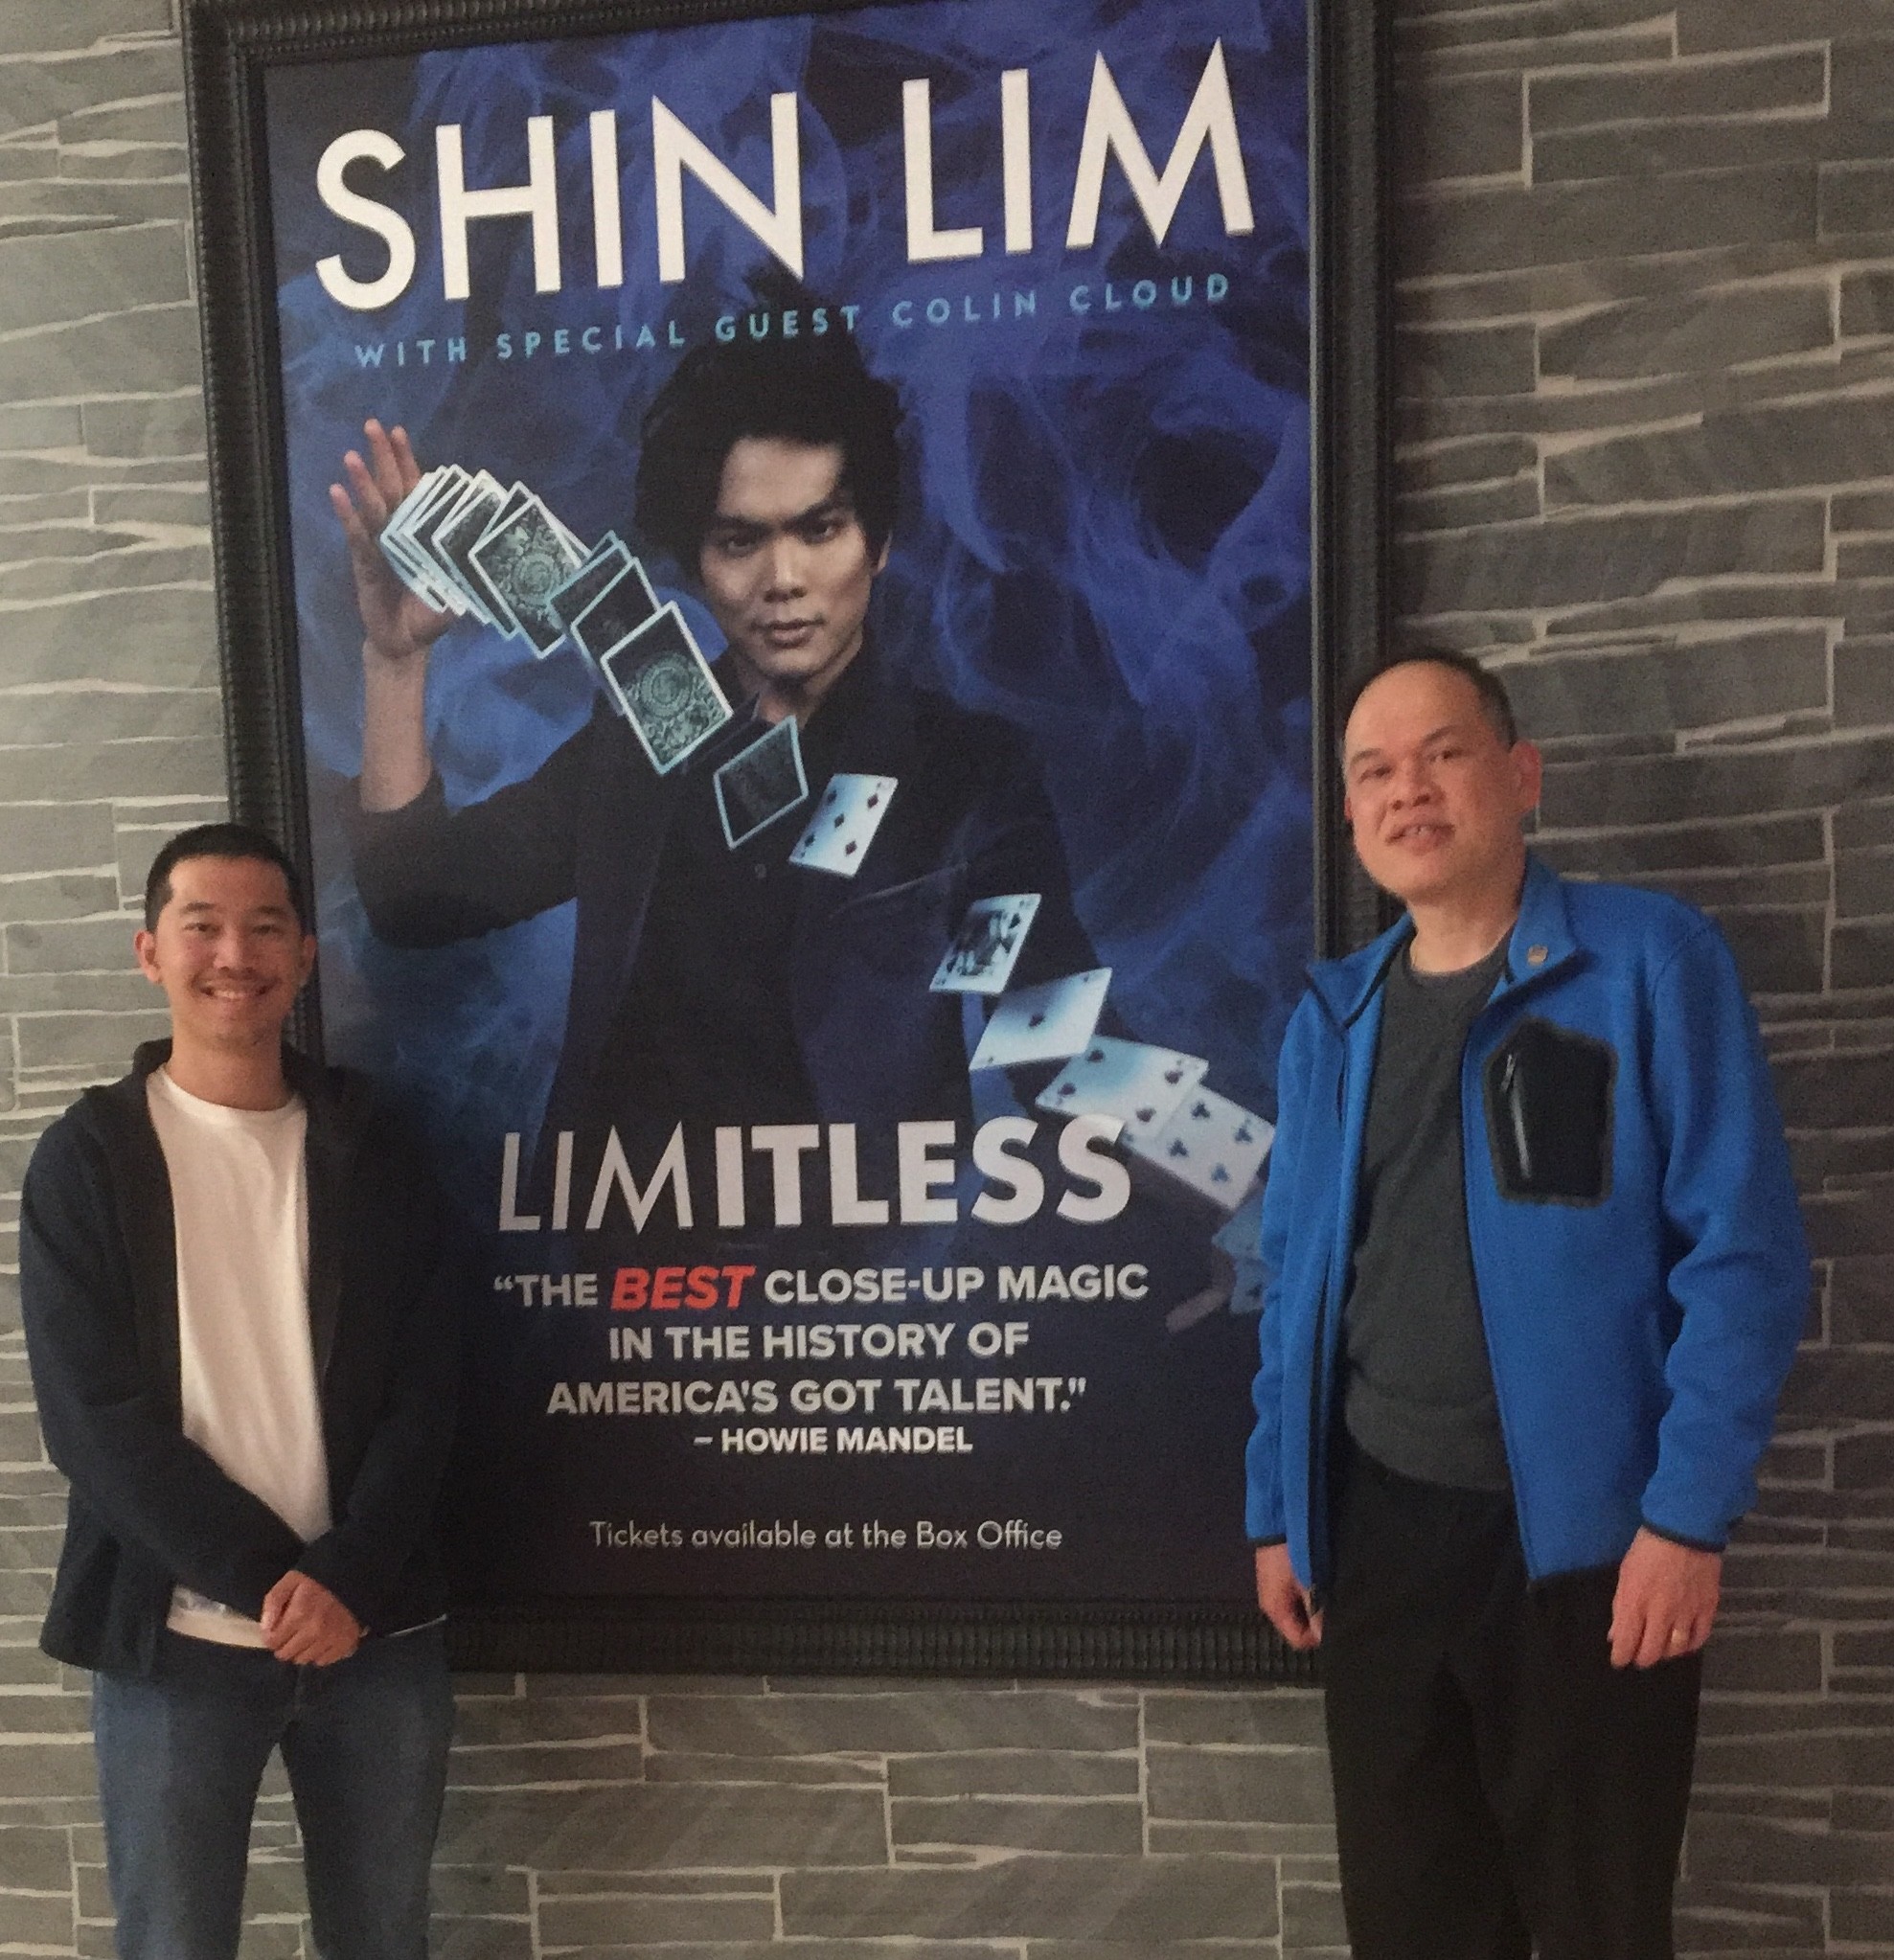 Is Shin Lim really Limitless?